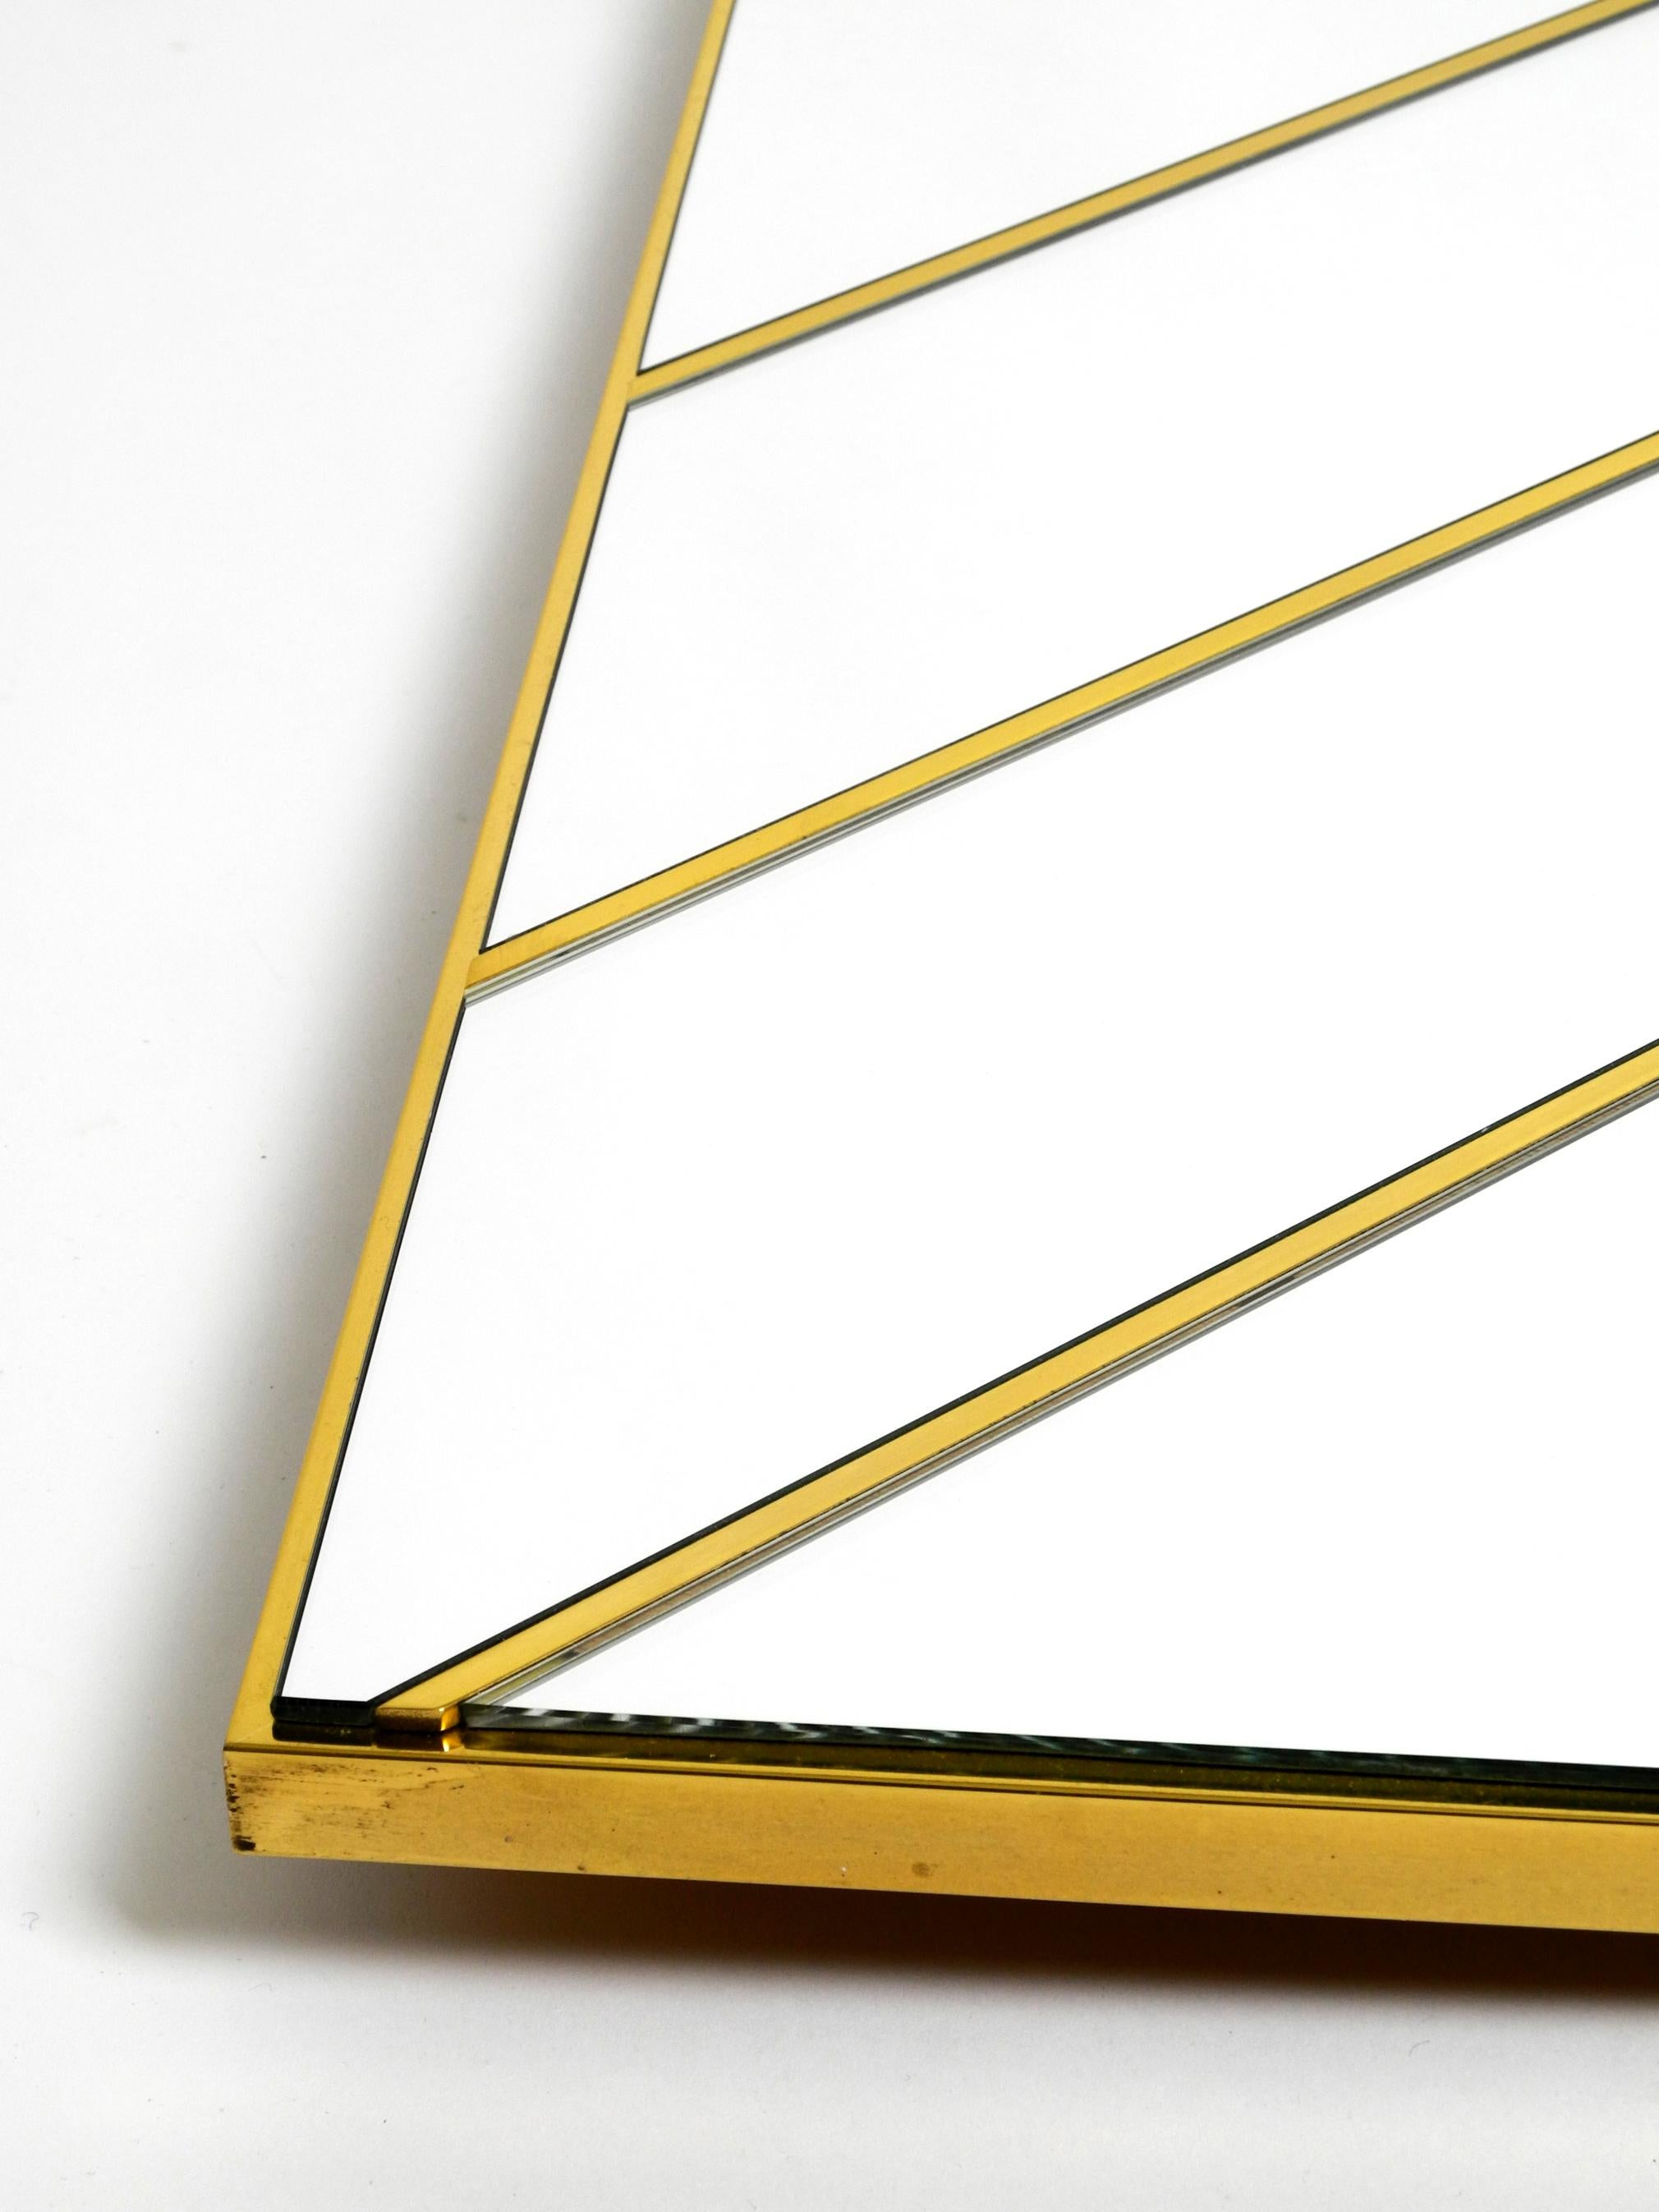 Large, Exceptional 1970s Brass Wall Mirror with Diagonal Mirror Strips For Sale 7